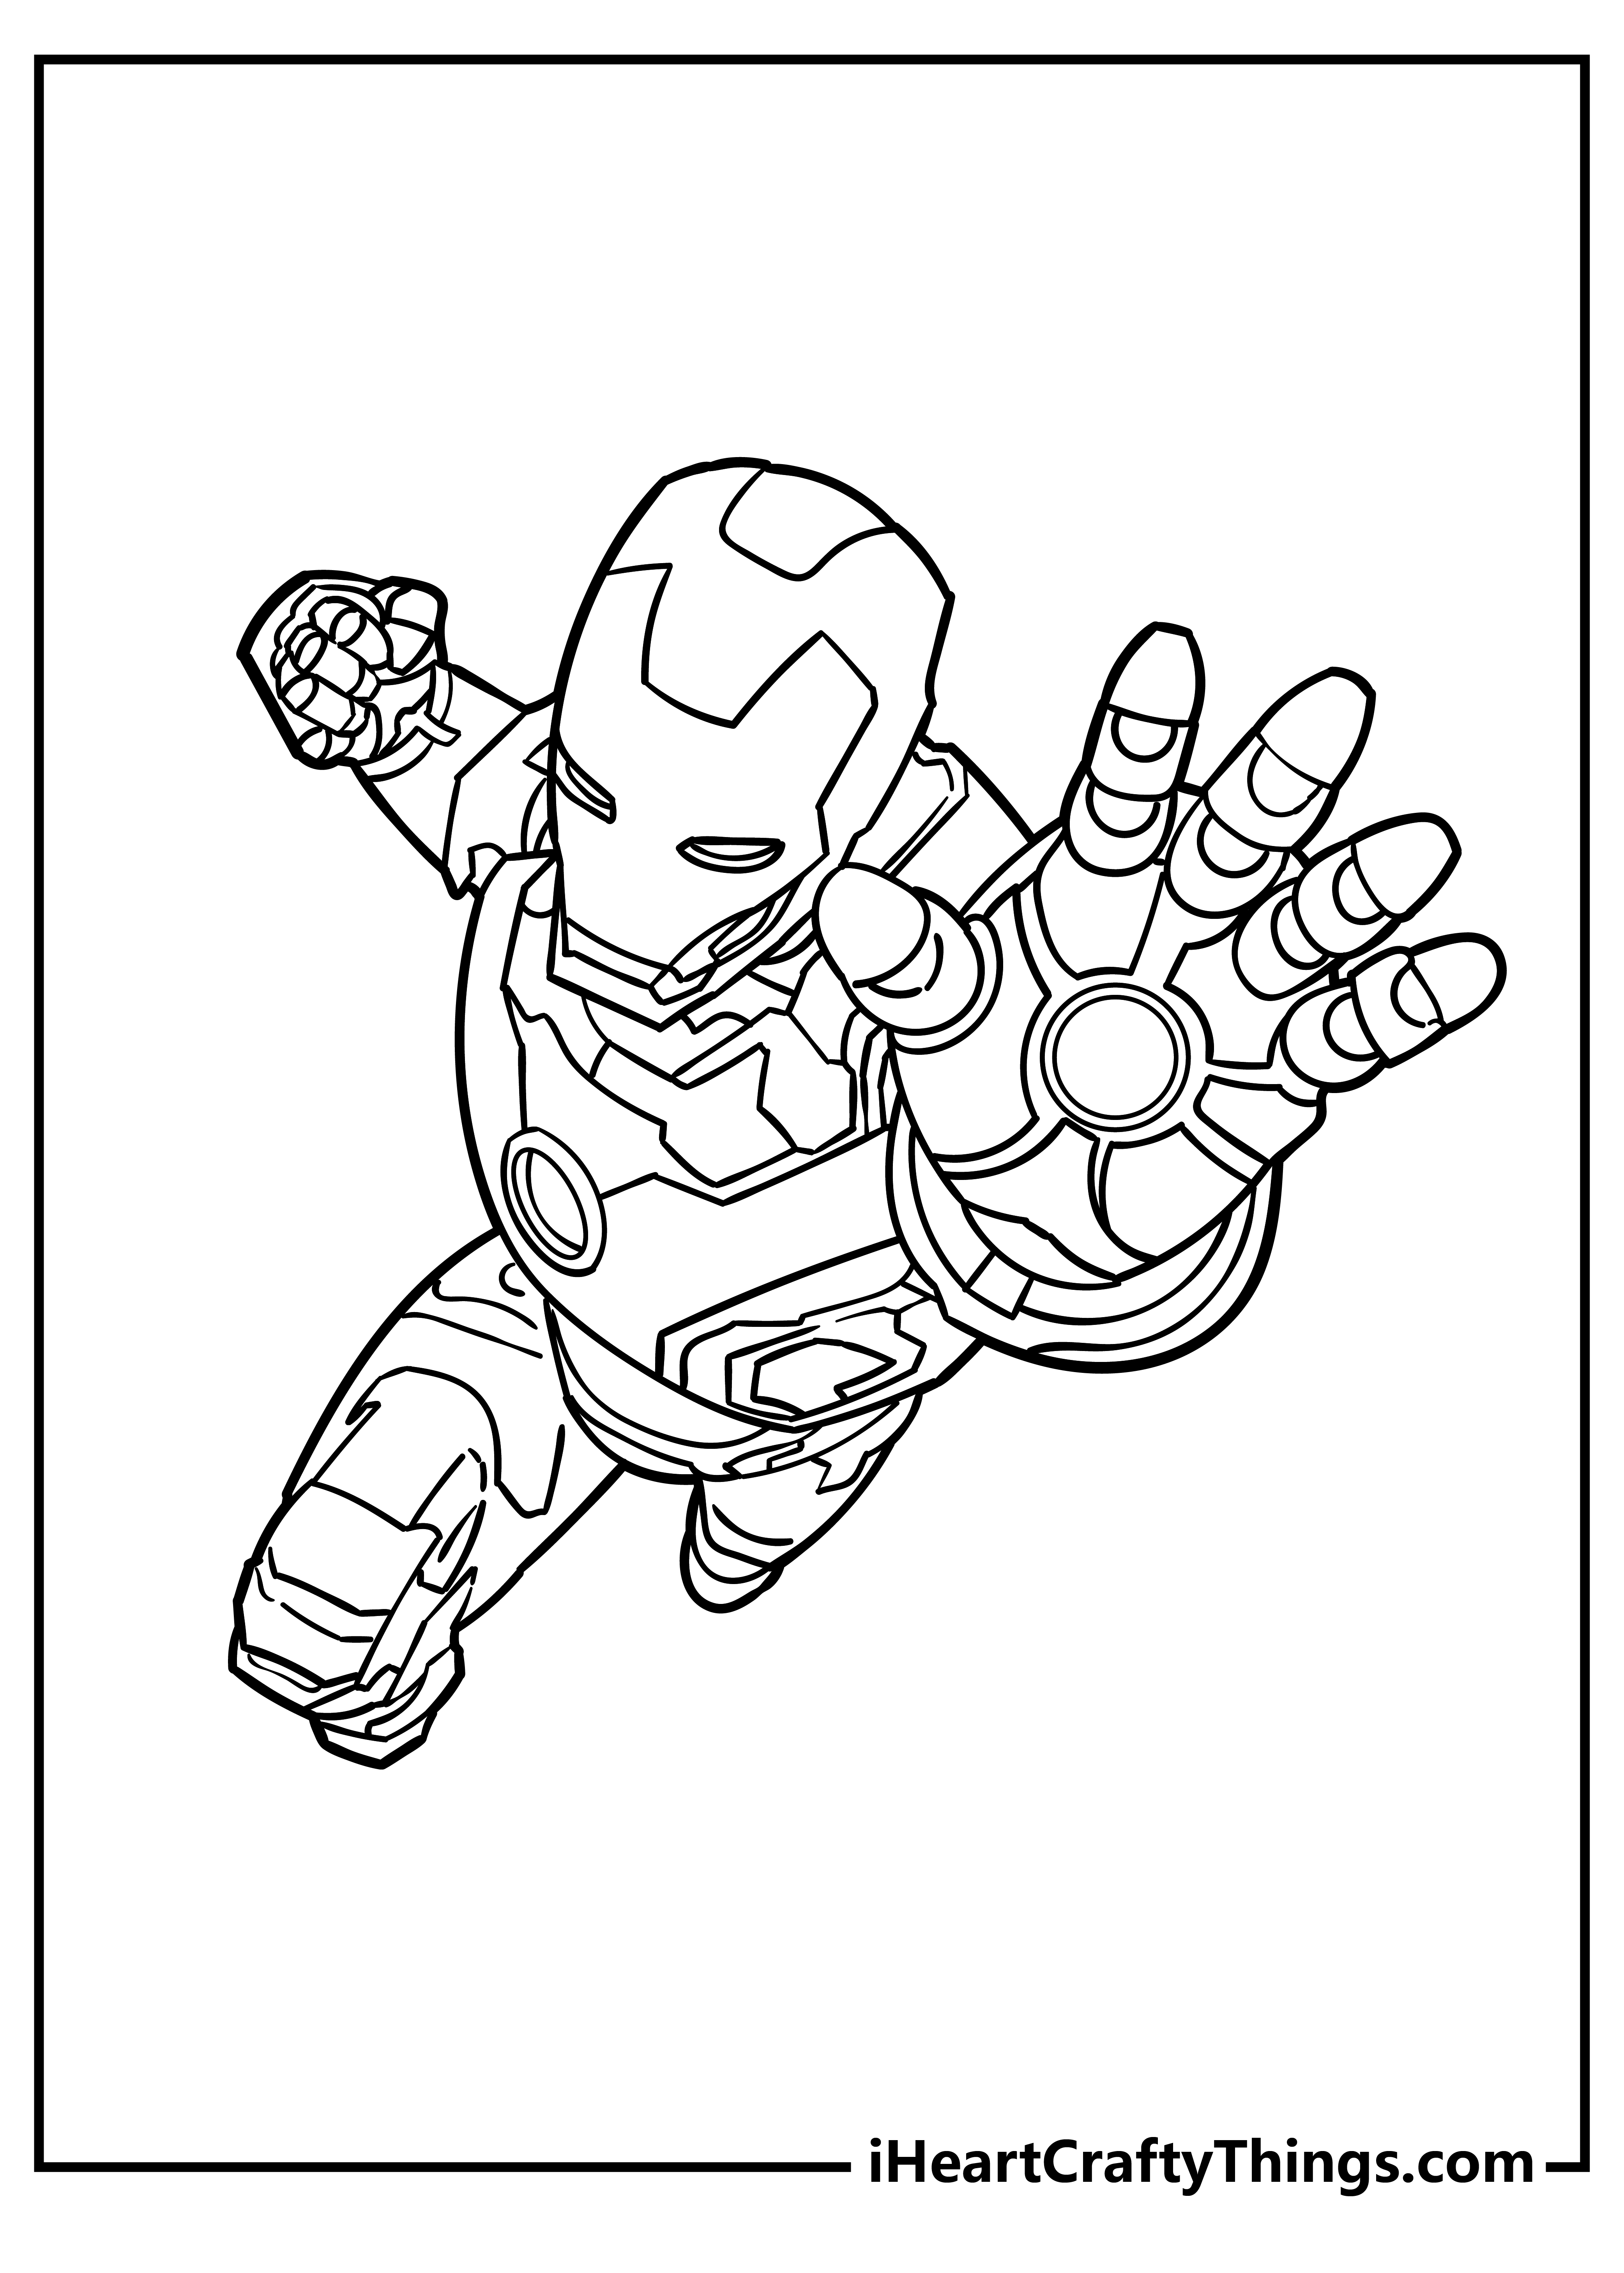 Printable Avengers Coloring Pages Updated 18